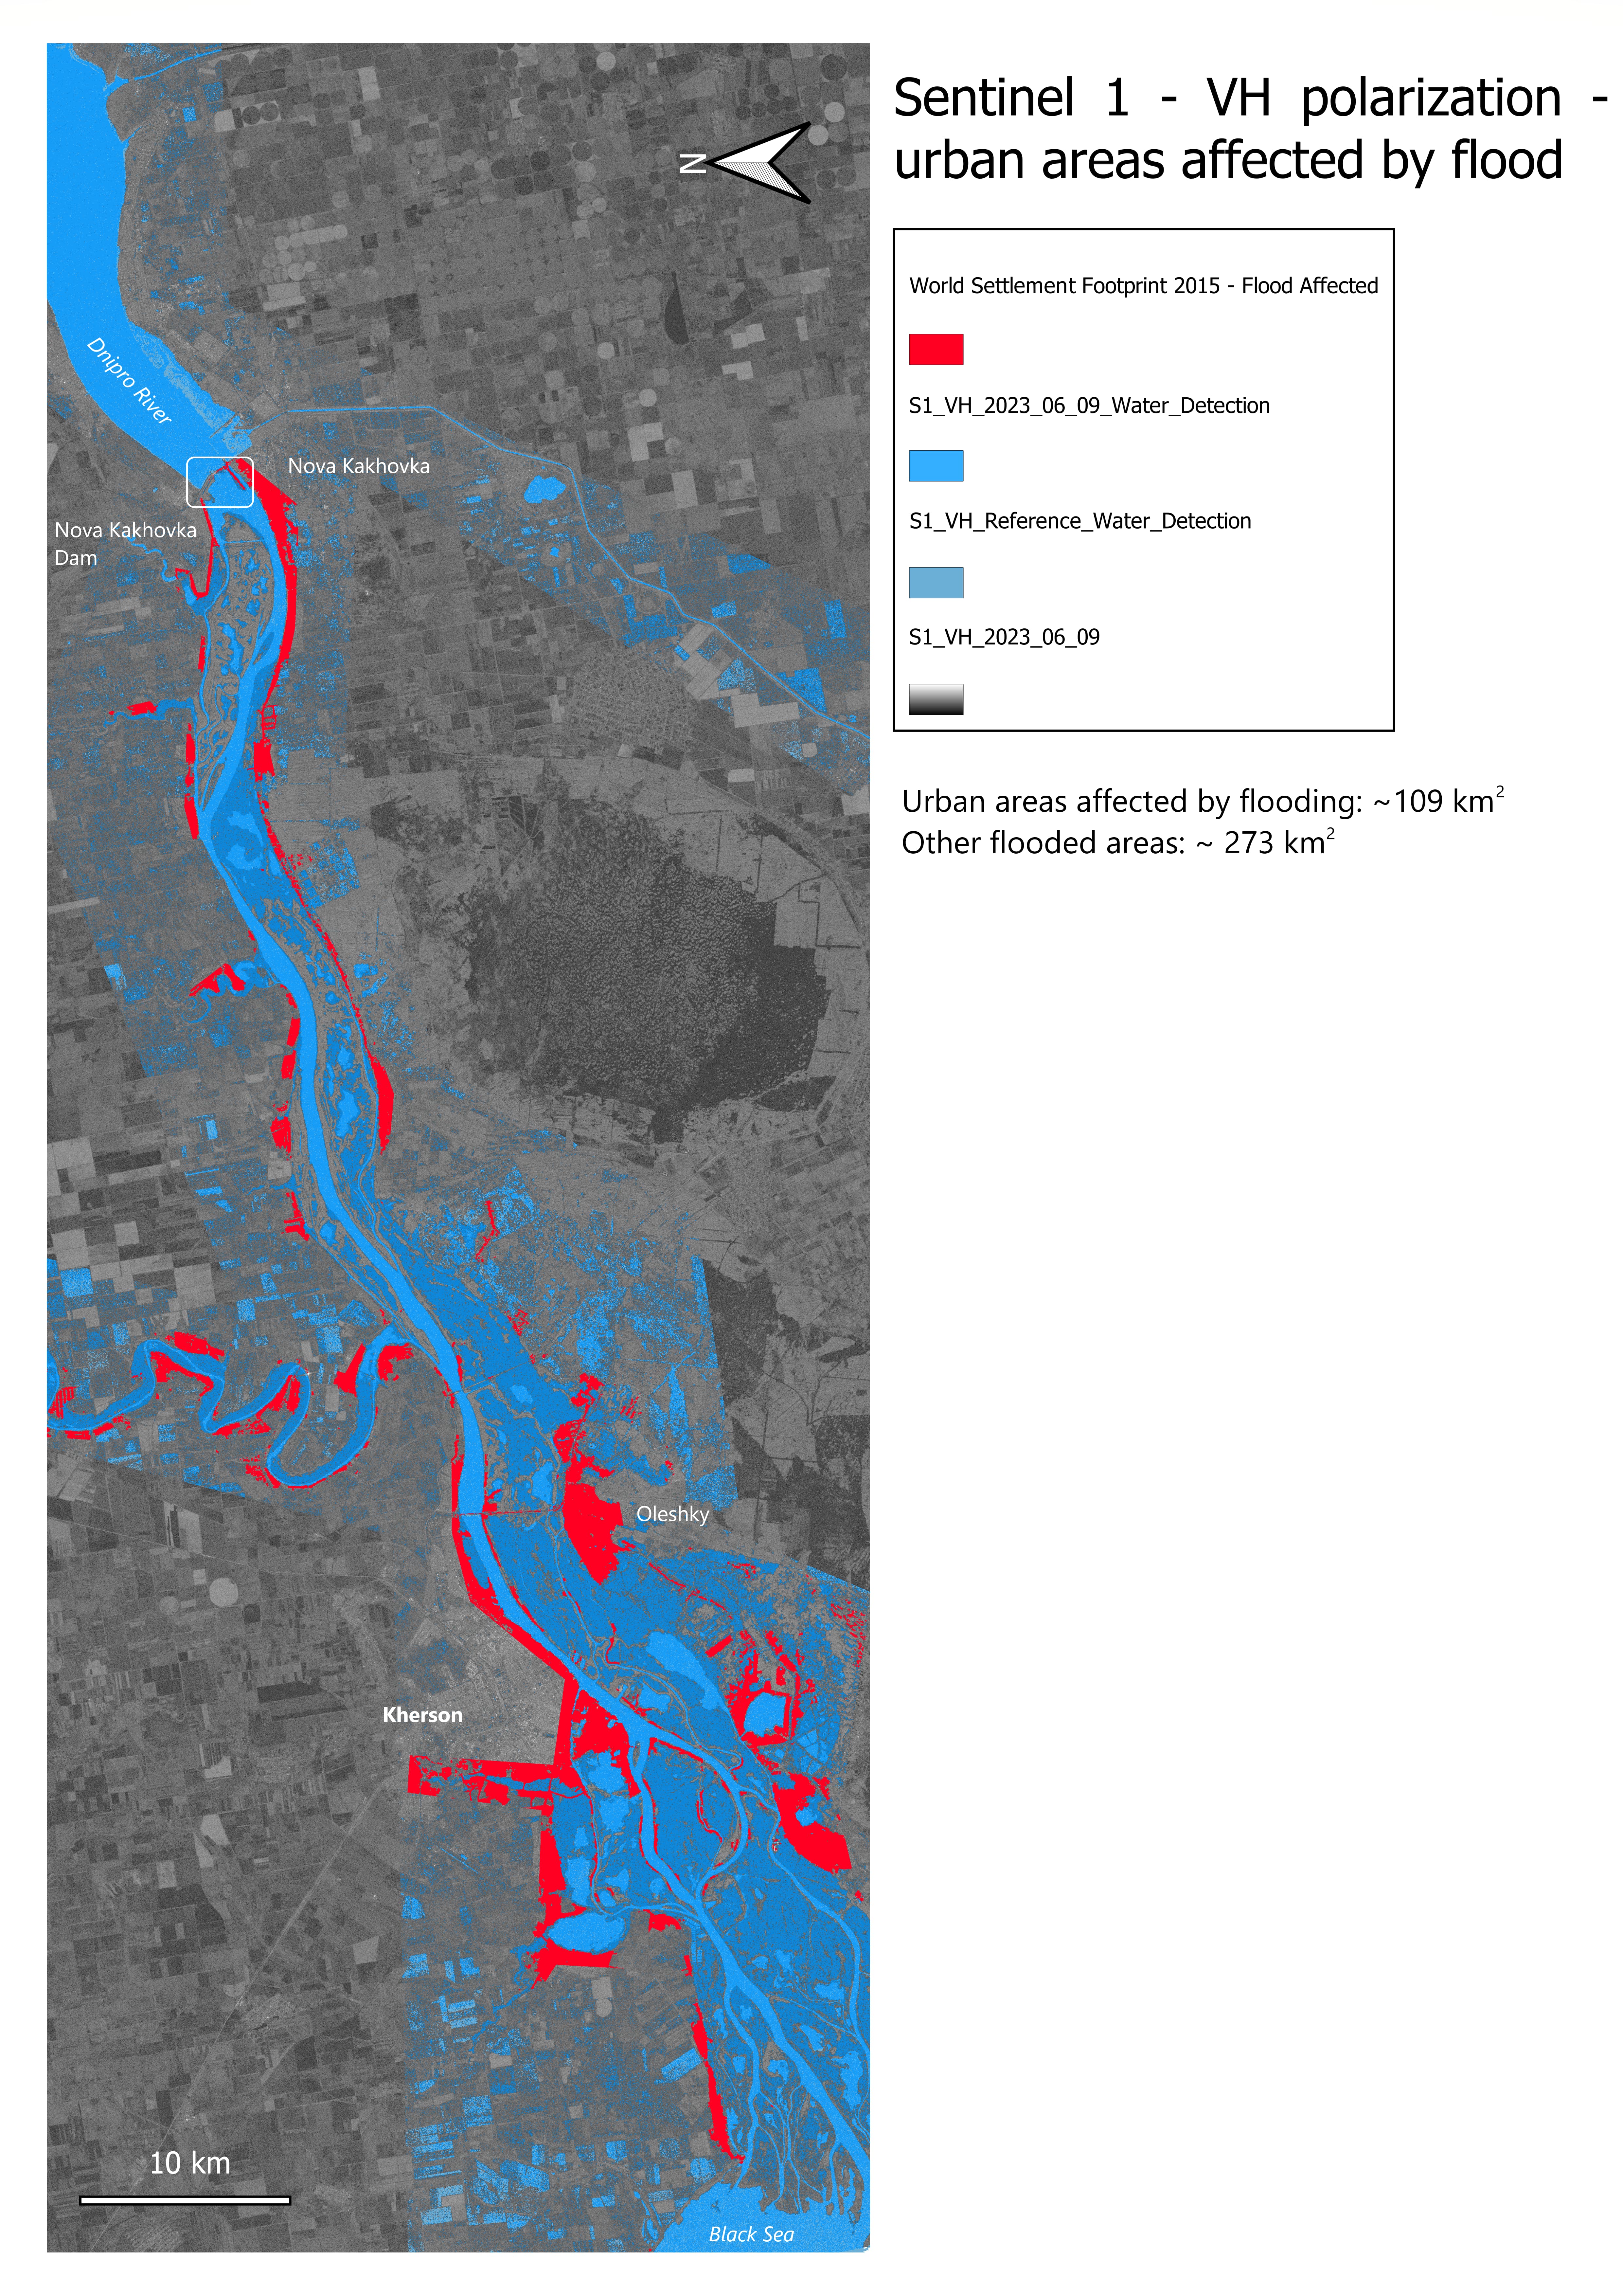 Sentinel-1 map showing the extent of flooding following the Nova Kakhovka dam breach with urban affected urban areas highlighted